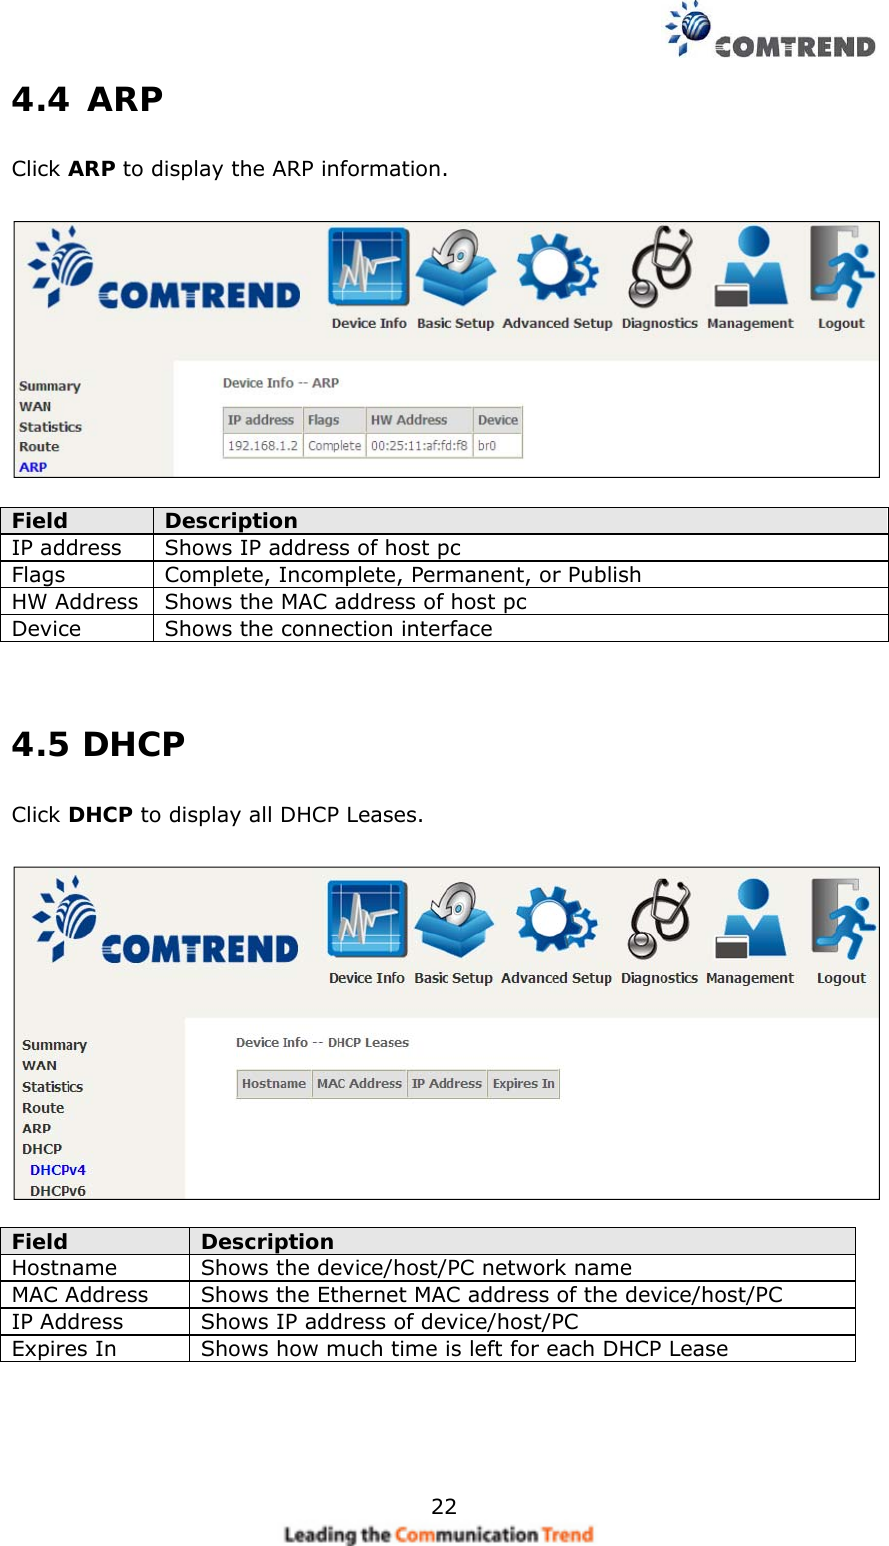    224.4 ARP Click ARP to display the ARP information.    Field  Description IP address  Shows IP address of host pc Flags  Complete, Incomplete, Permanent, or Publish HW Address  Shows the MAC address of host pc Device  Shows the connection interface      4.5 DHCP Click DHCP to display all DHCP Leases.    Field  Description Hostname  Shows the device/host/PC network name MAC Address  Shows the Ethernet MAC address of the device/host/PC IP Address  Shows IP address of device/host/PC Expires In  Shows how much time is left for each DHCP Lease 